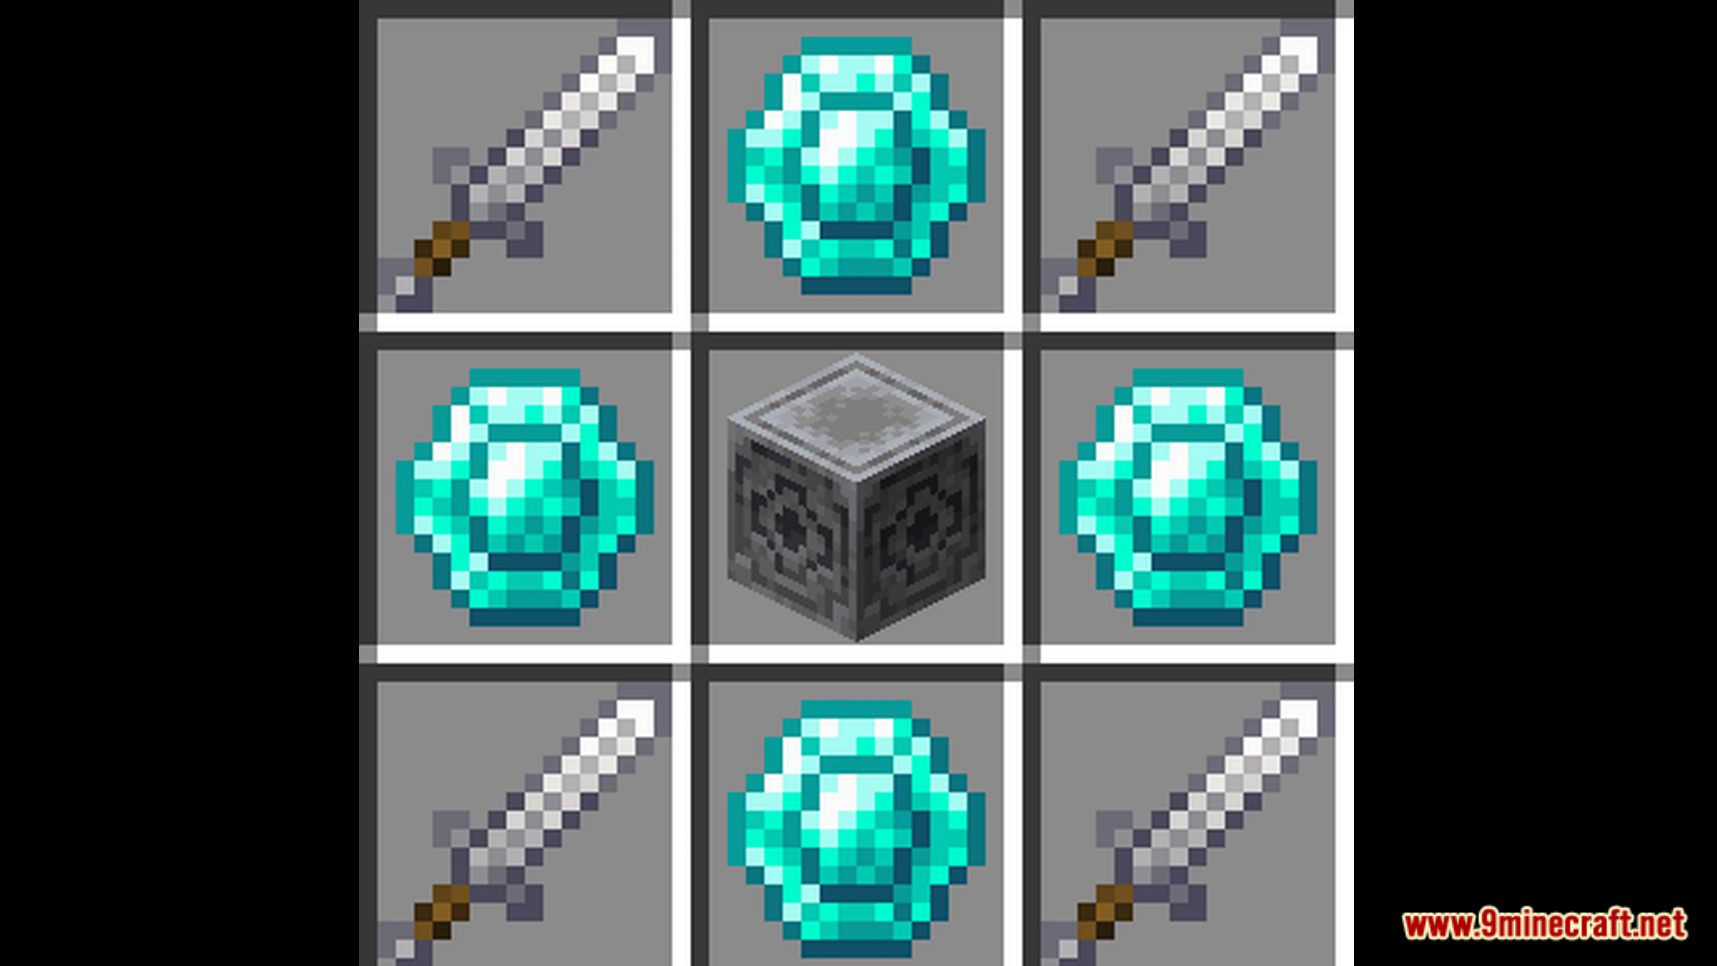 Swords And Strongholds Data Pack (1.19.2, 1.19) - Dungeons, Weapons 